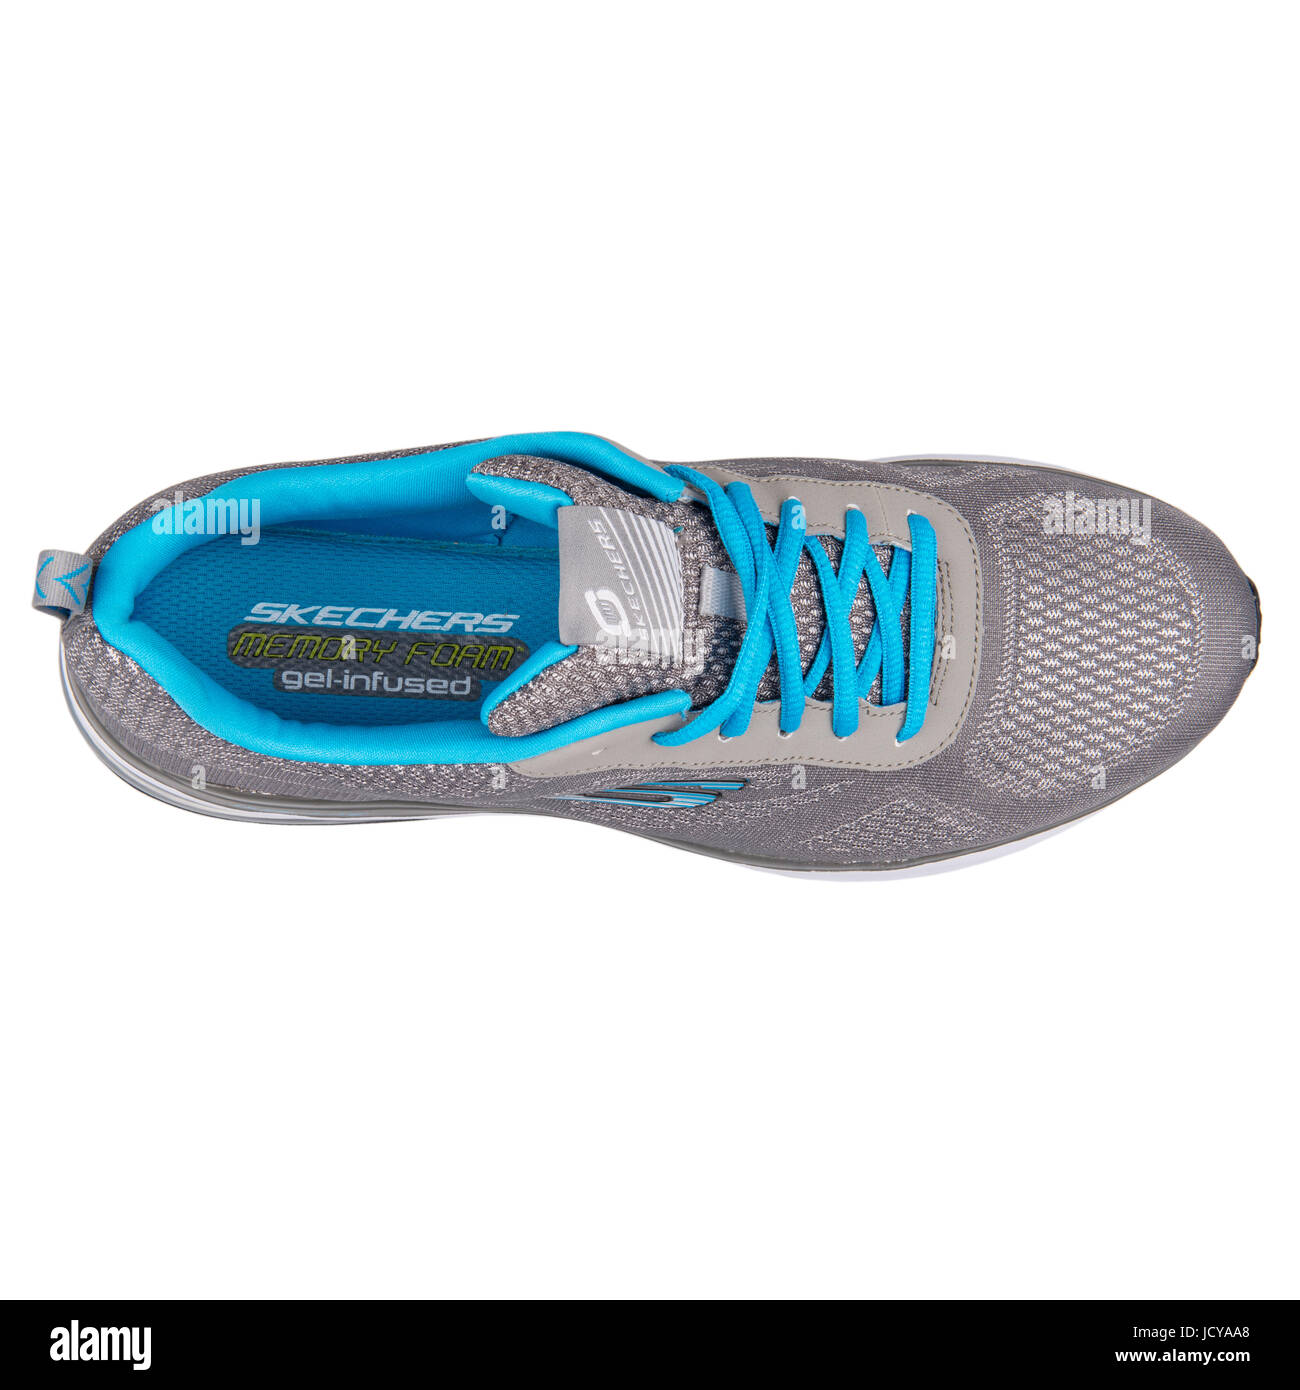 Skechers Skech-Air Infinity Grey and Blue Men's Running Shoes - 51480-GYBL  Stock Photo - Alamy